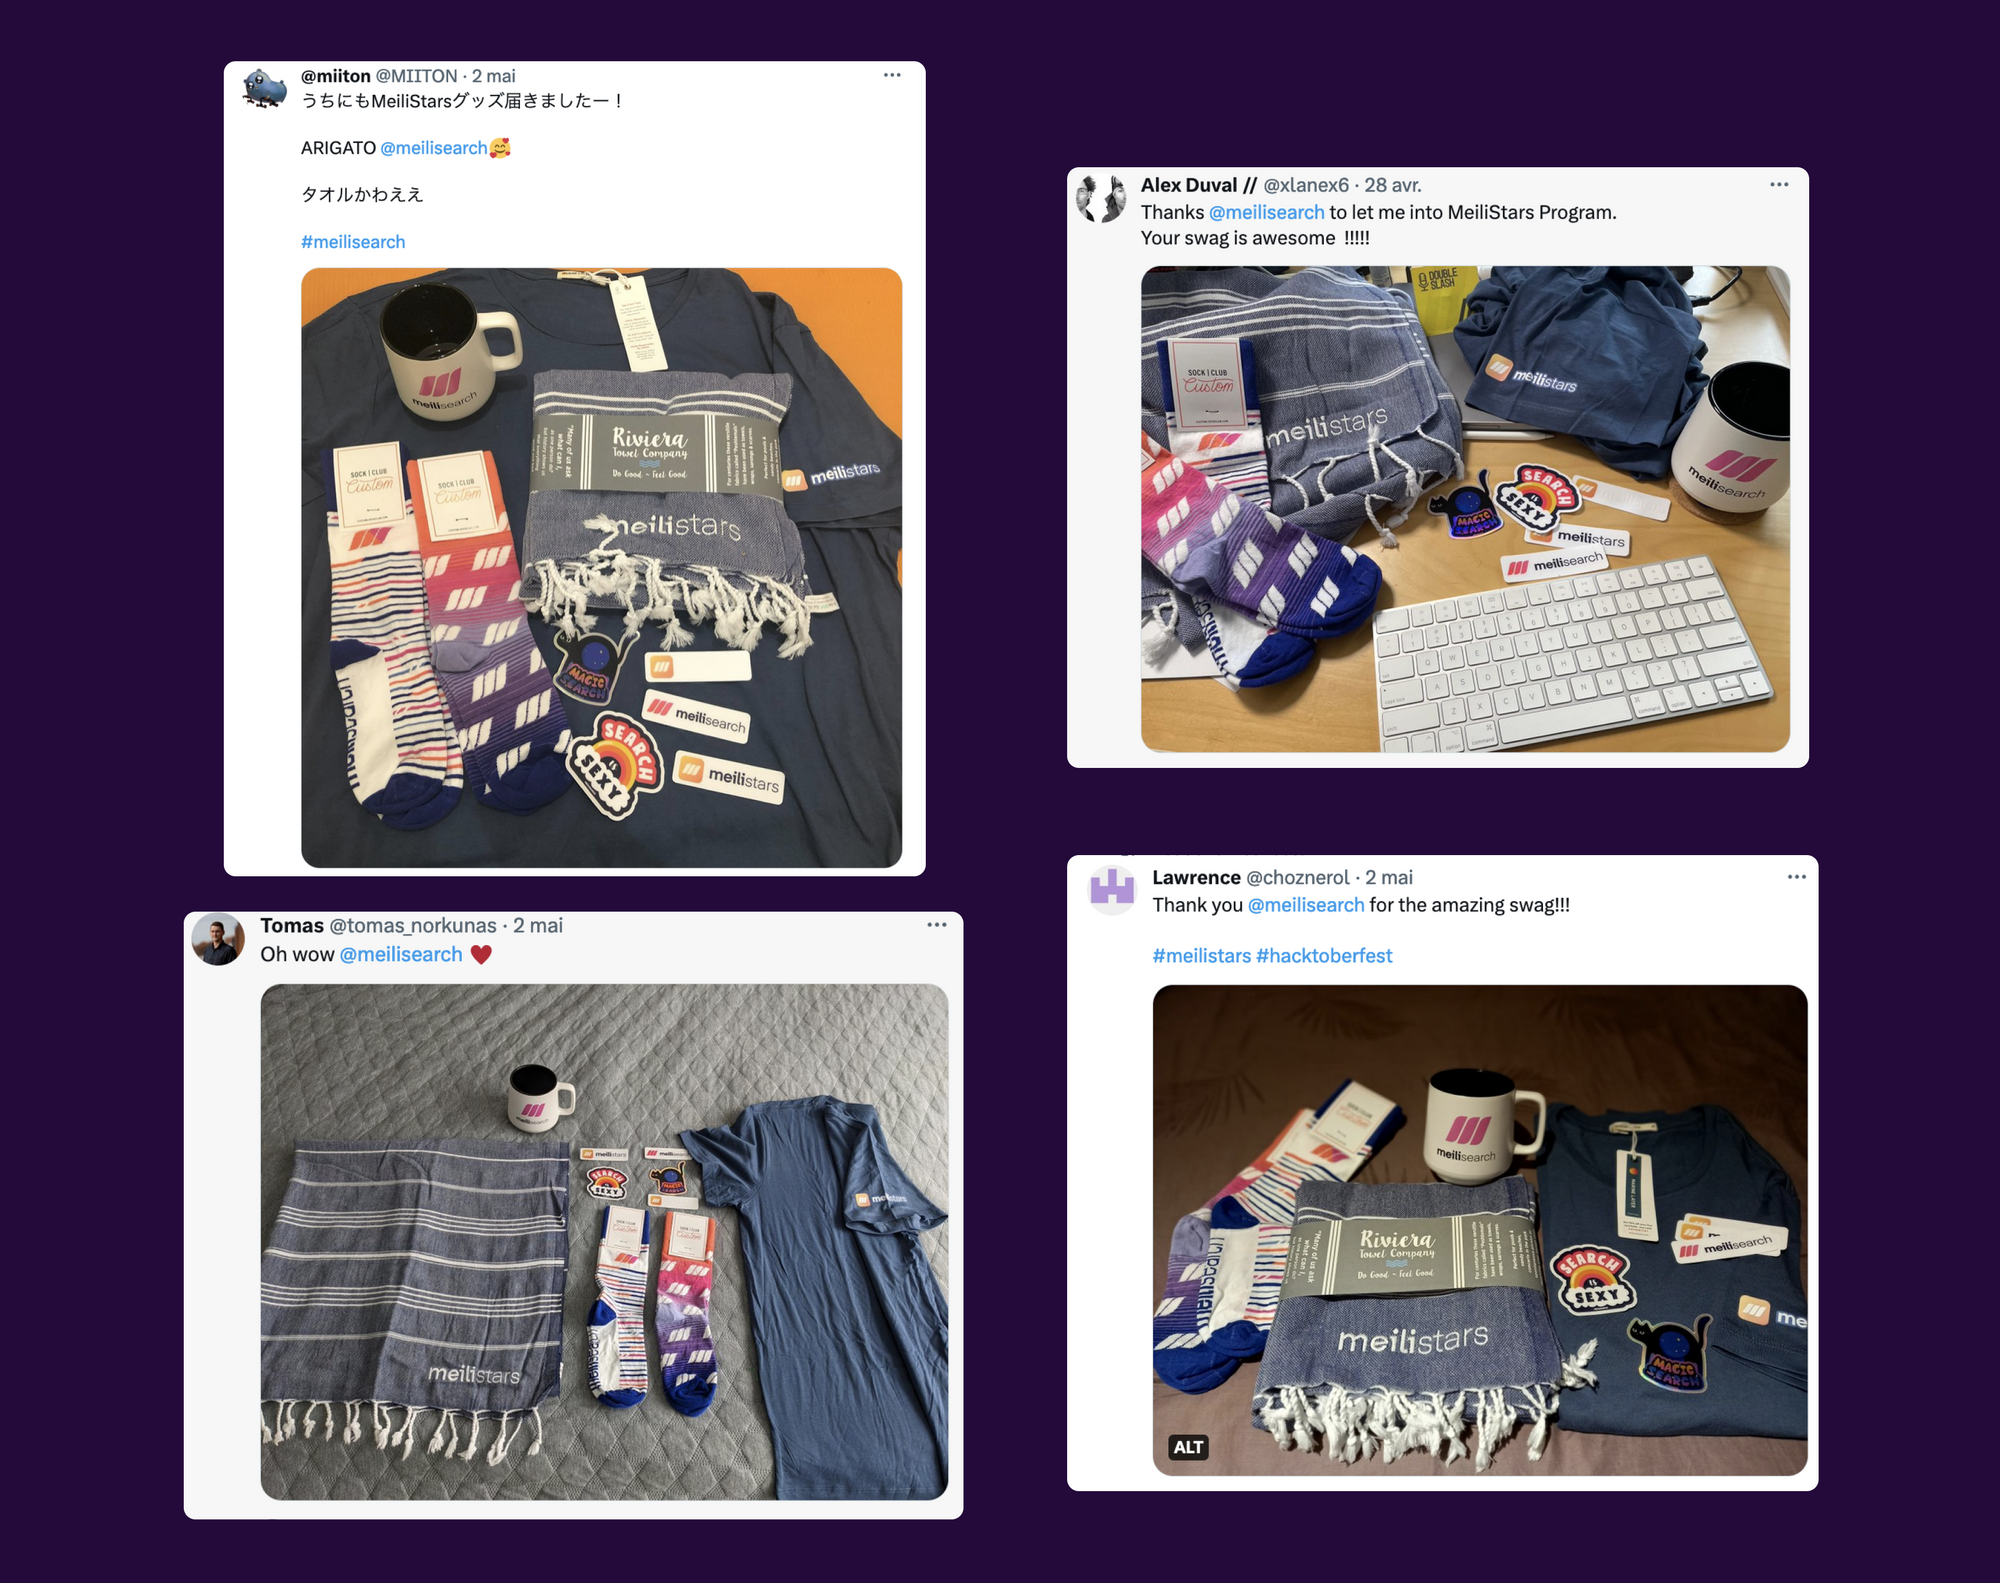 Screencaptures of tweets by Meilistars showcasing received swag